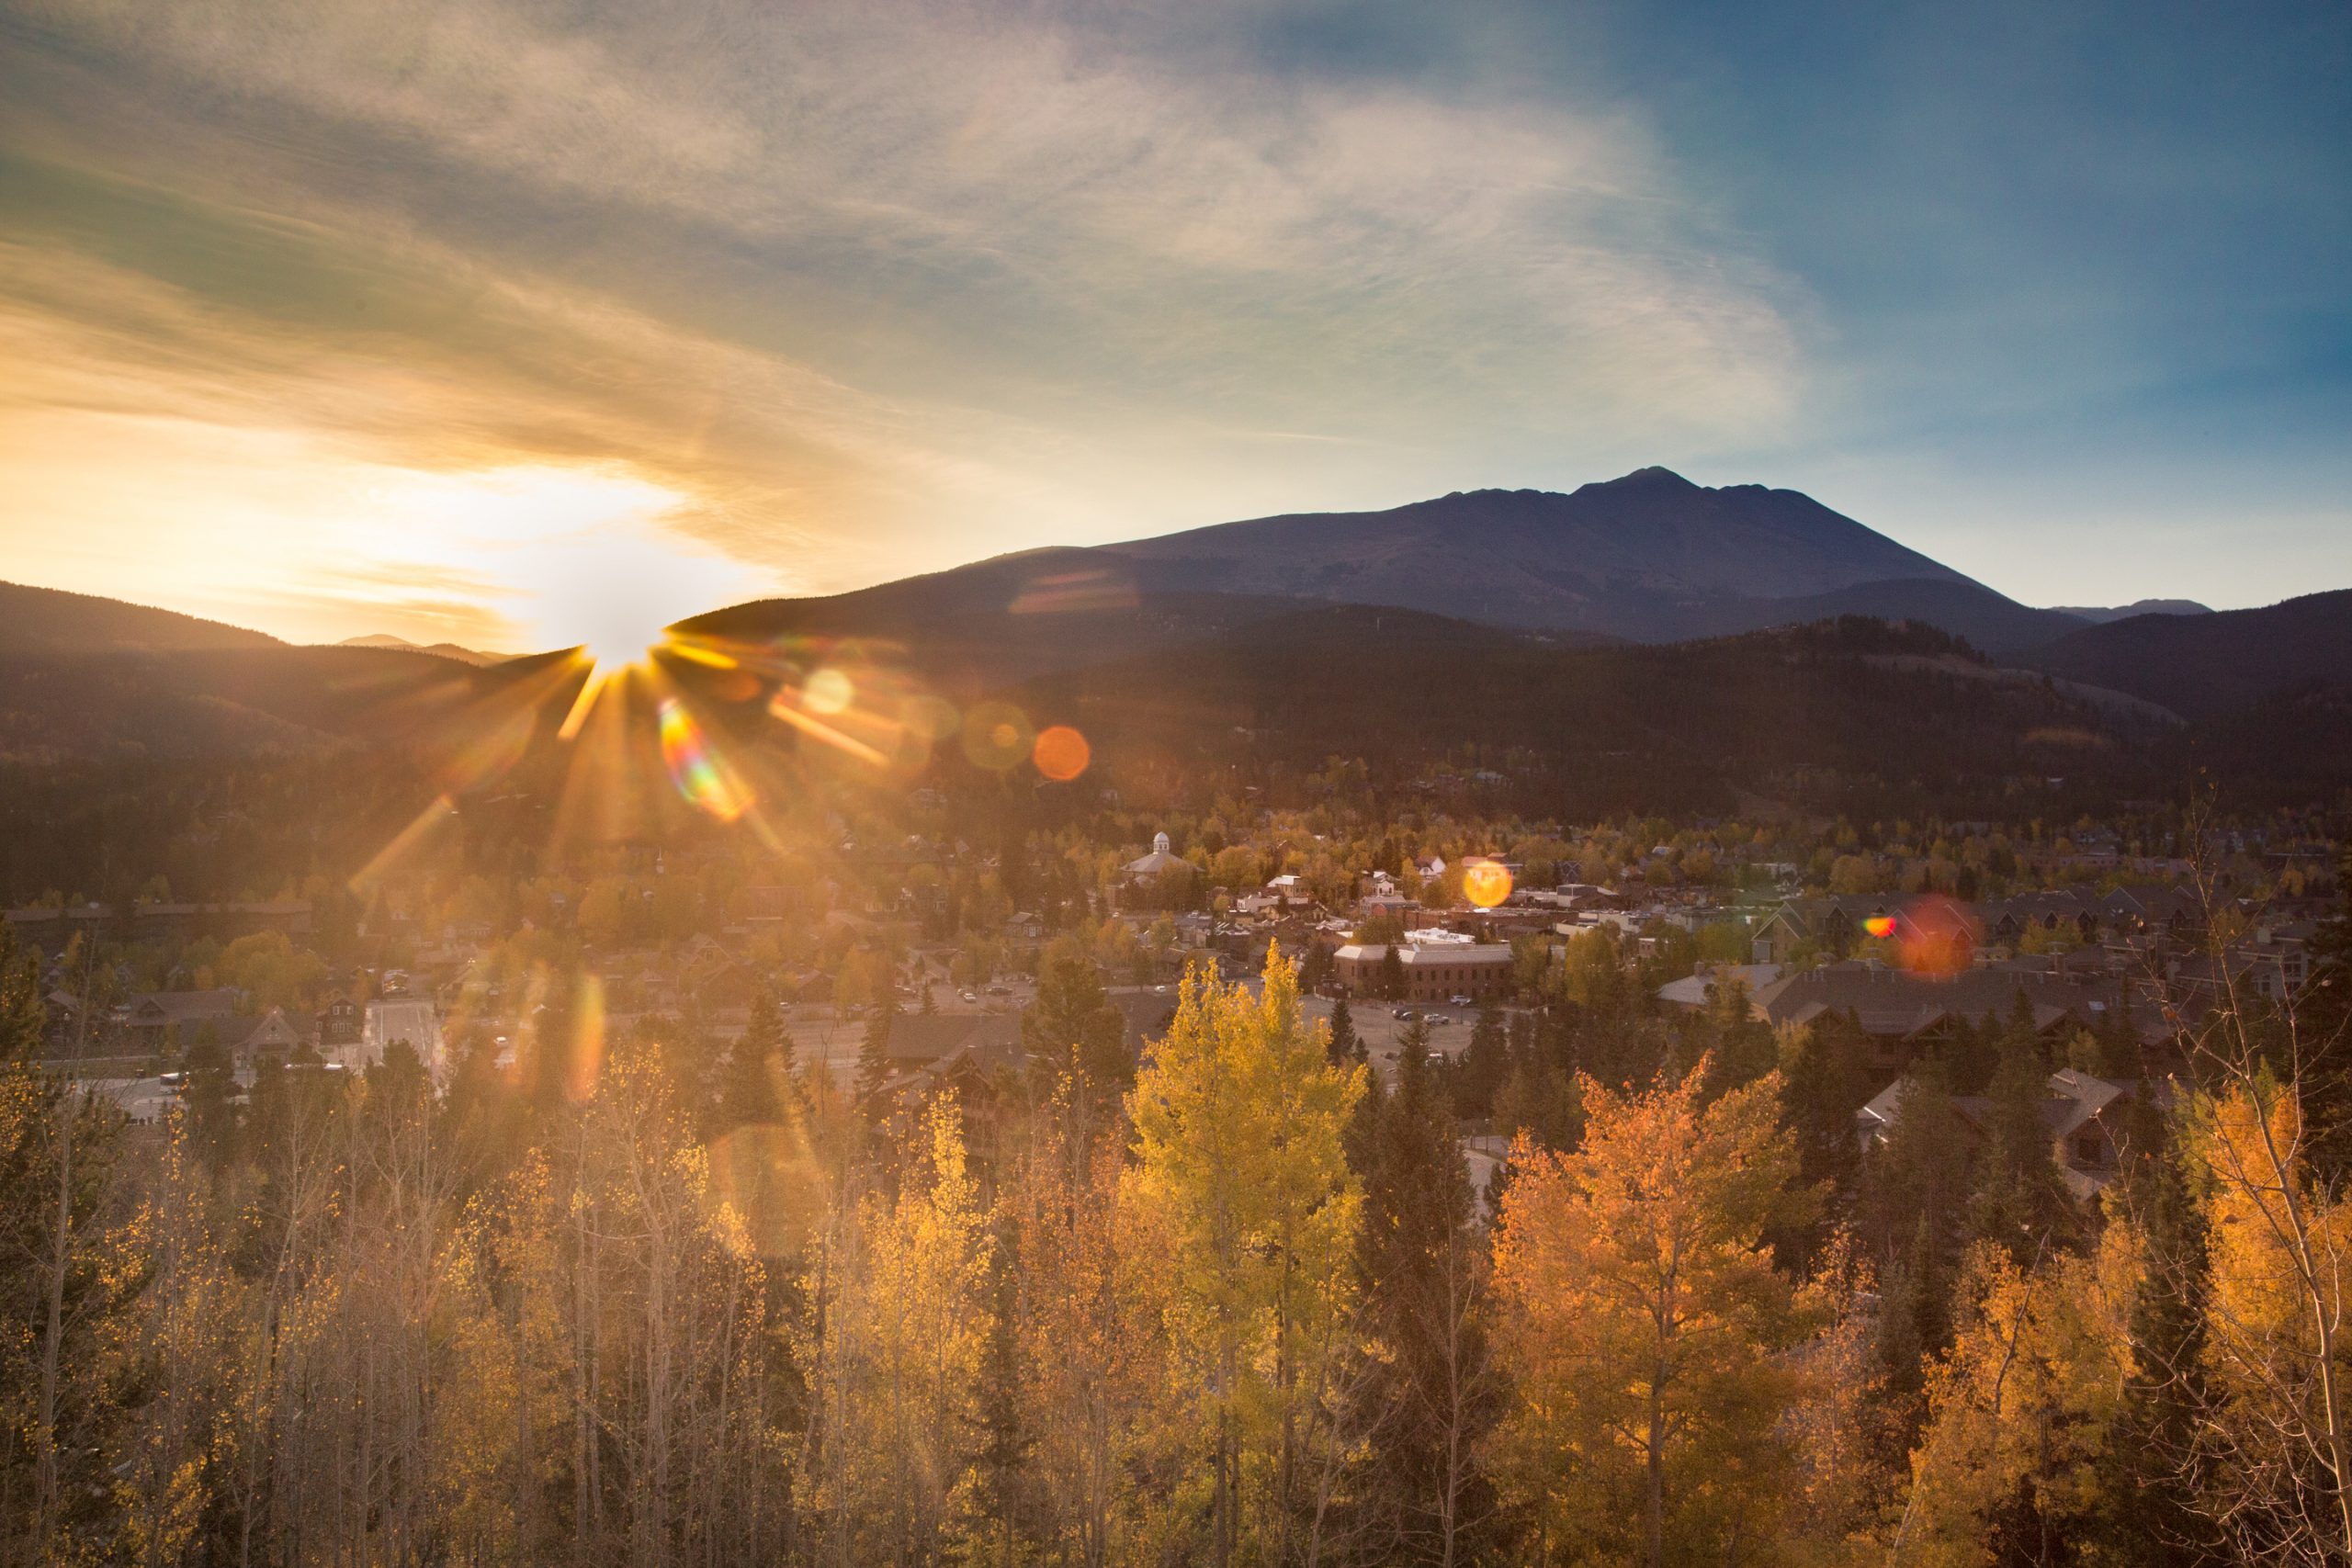 Sunrise over Breckenridge with yellow trees in the foreground.